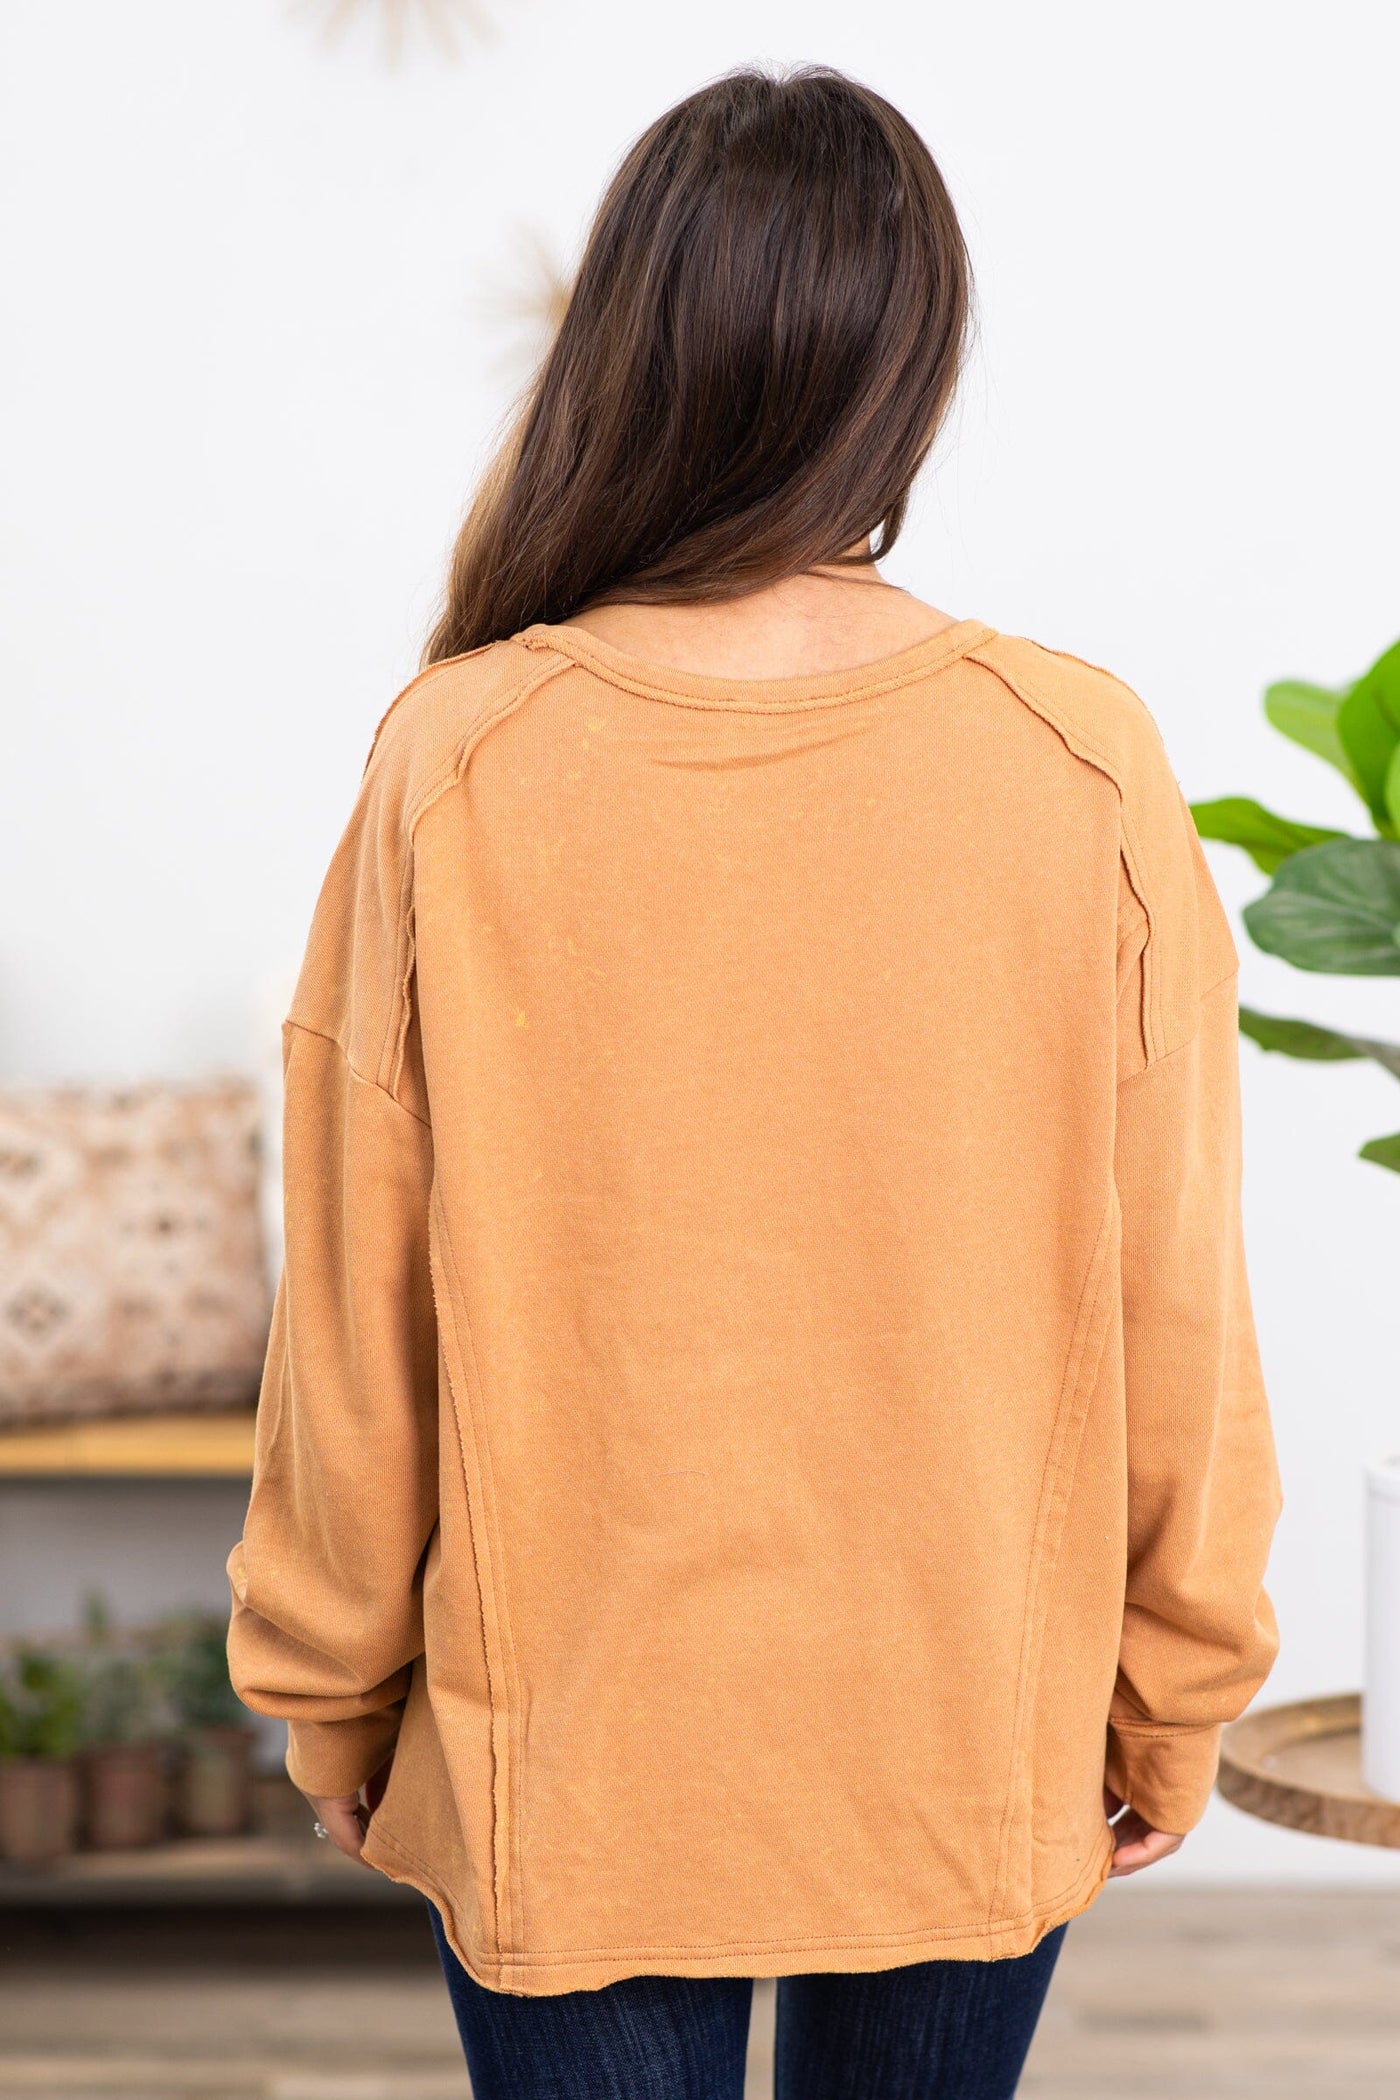 Cinnamon Mineral Washed Sweatshirt - Filly Flair